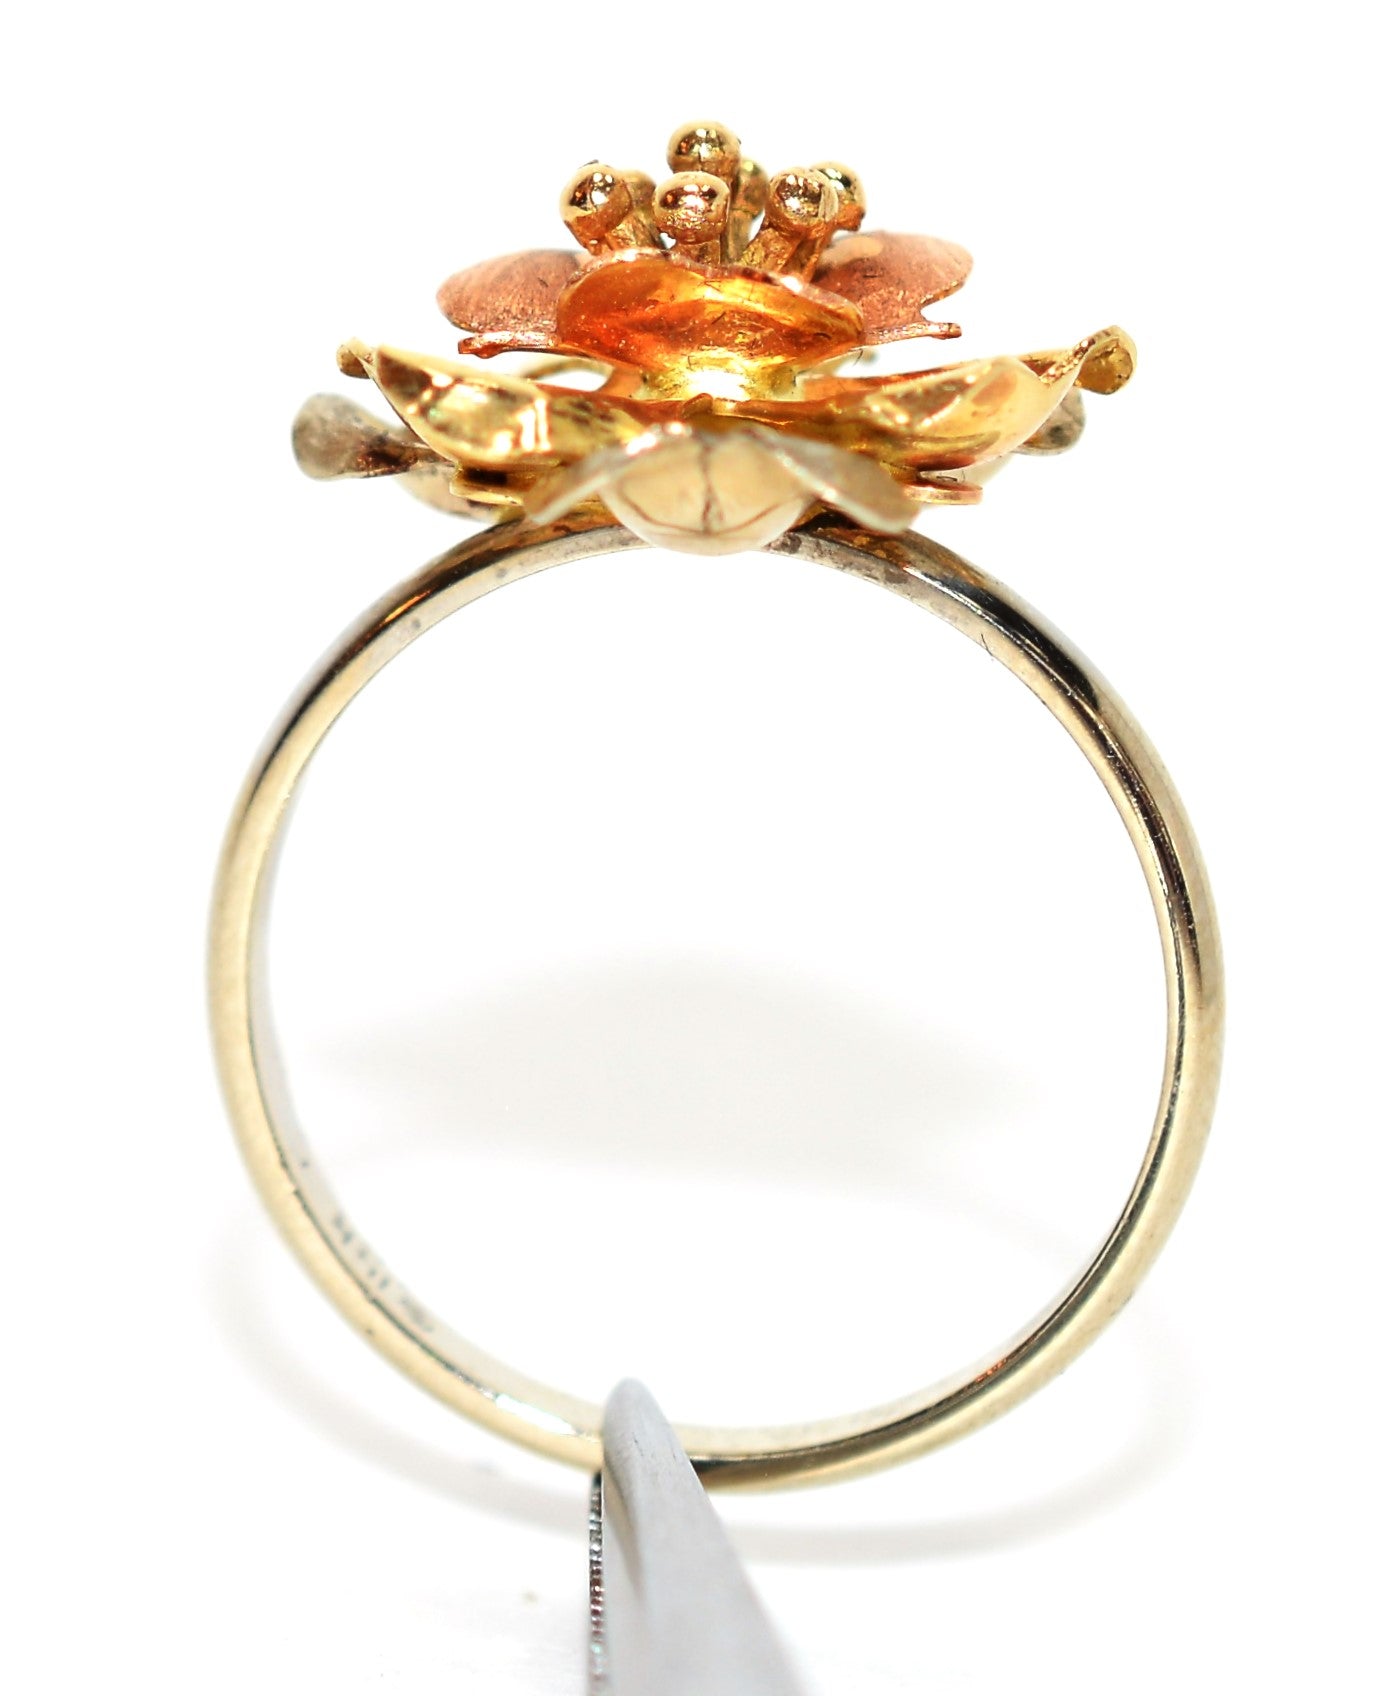 14K Solid Gold Ring Tri-Color Gold Rose Gold White Gold Flower Ring Floral Statement Estate Vintage Jewellery No Stone Made in Italy TriTone